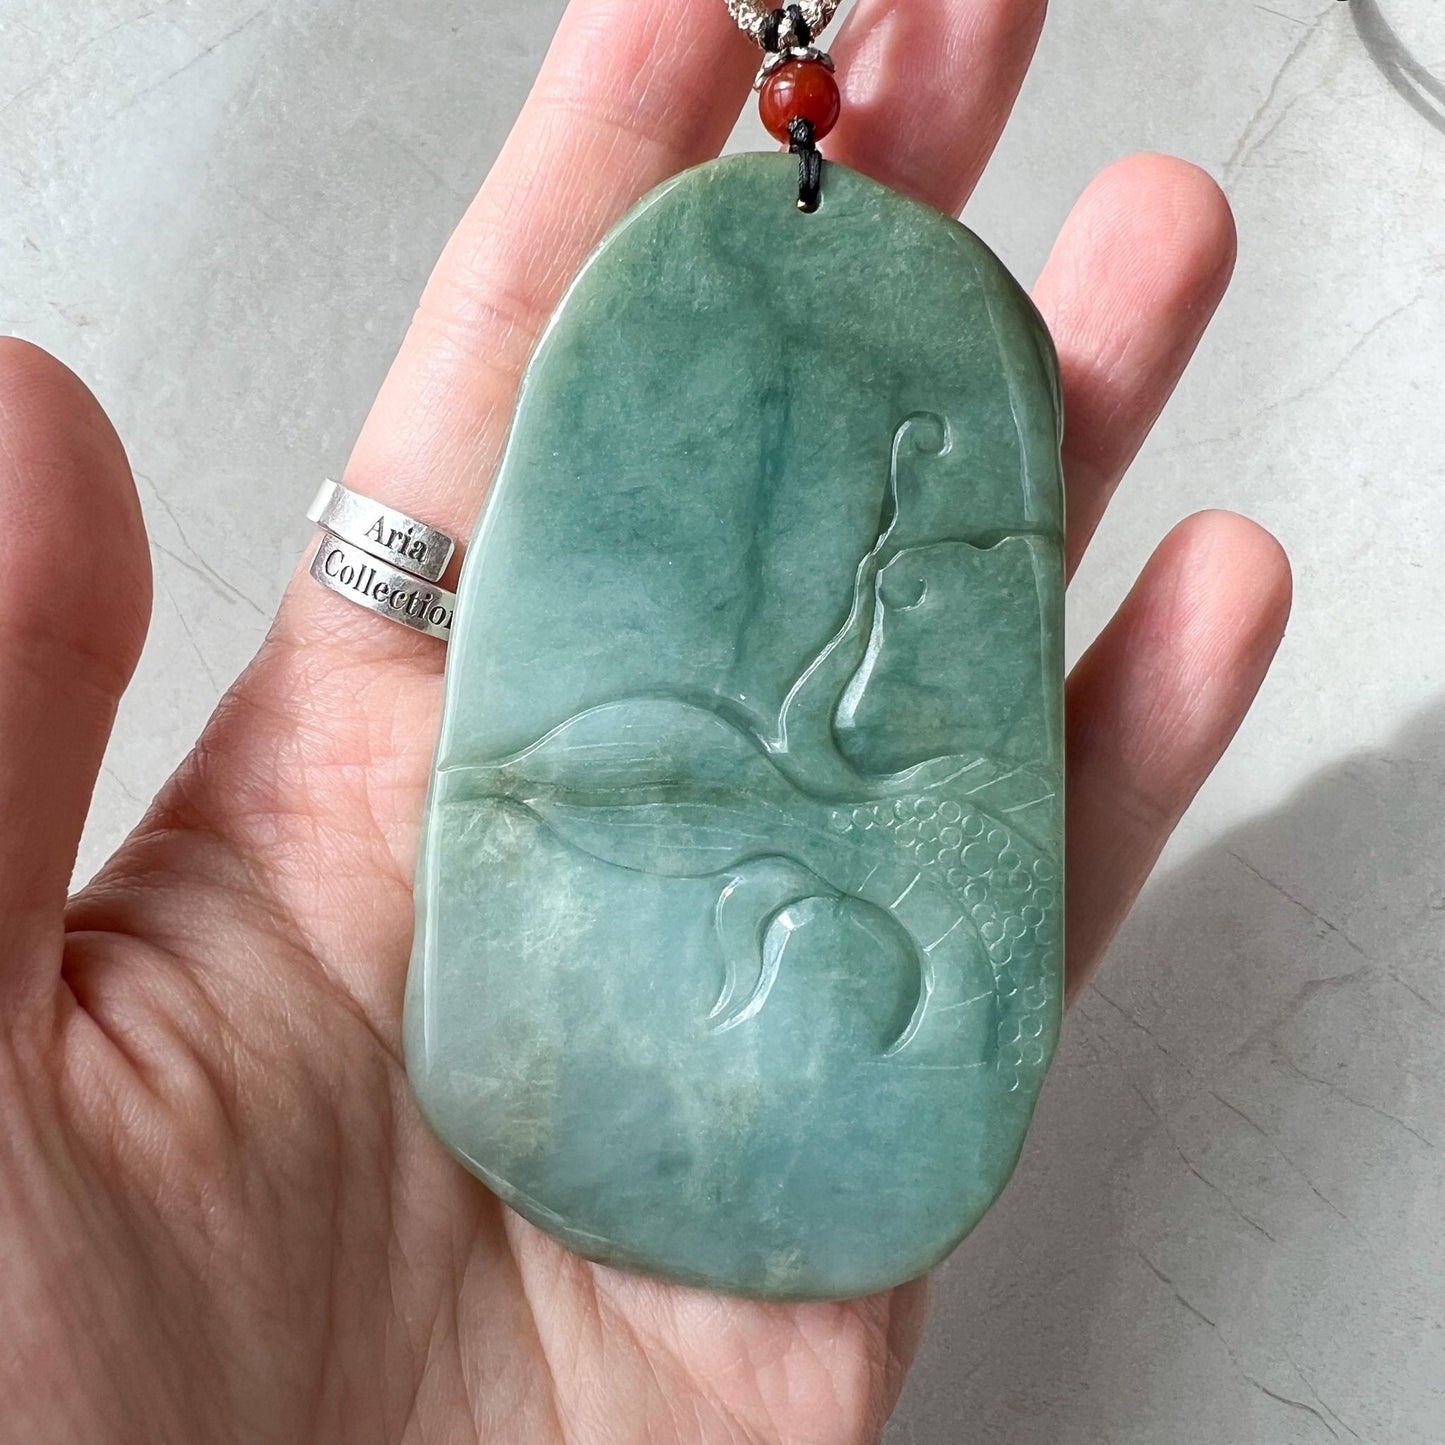 Large Jadeite Jade Dragon and Sword Pendant Necklace, Chinese Zodiac, Green Jade, Hand Carved, YJ-0722-0008087